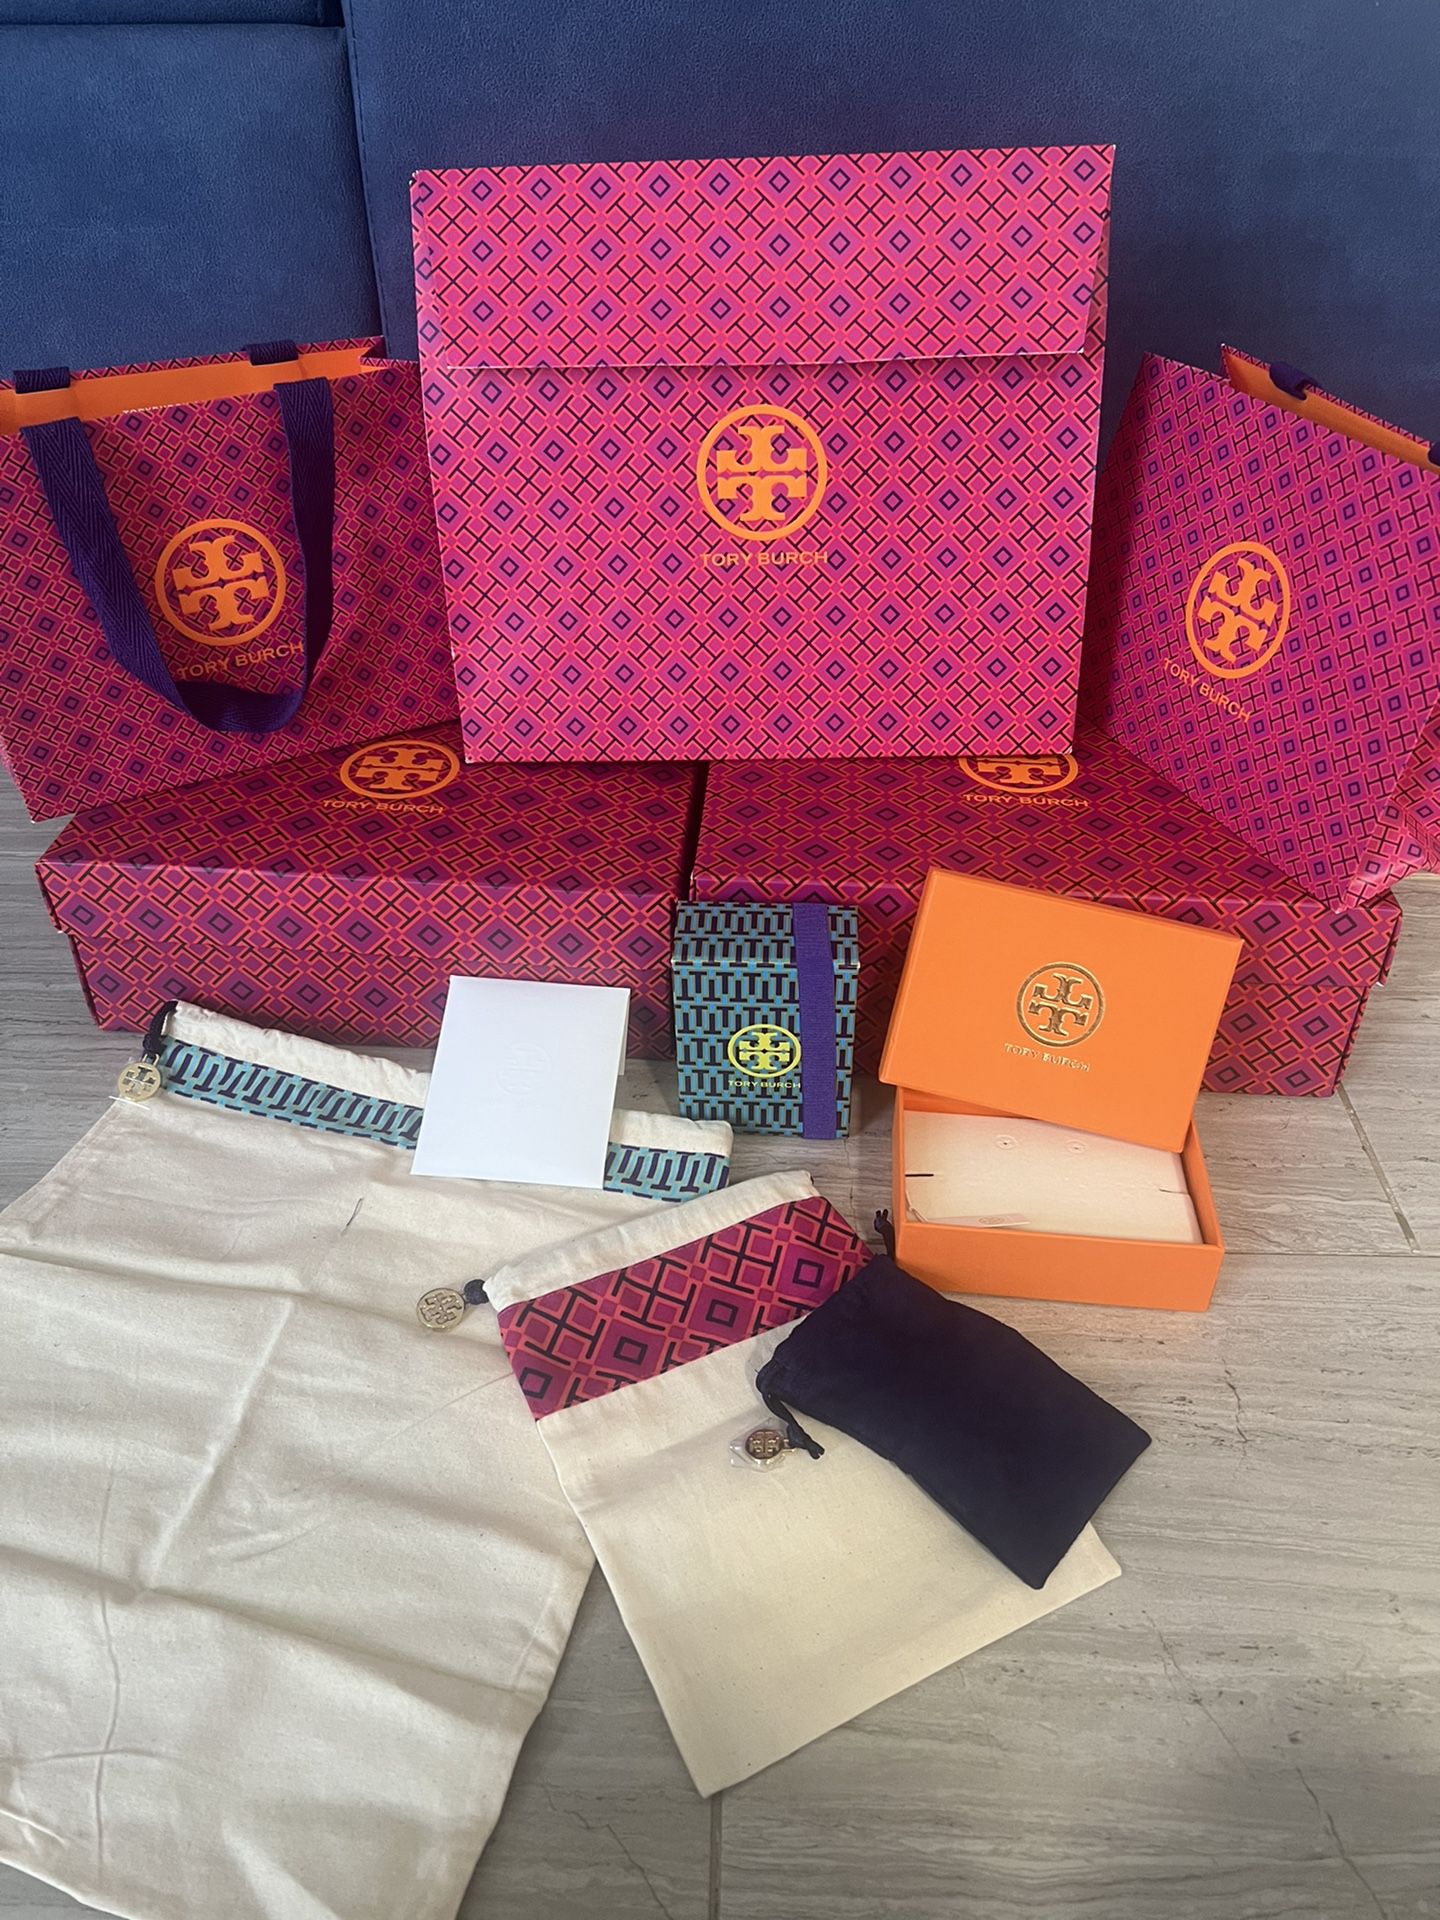 Tory Burch Bags for Sale in West Palm Beach, FL - OfferUp